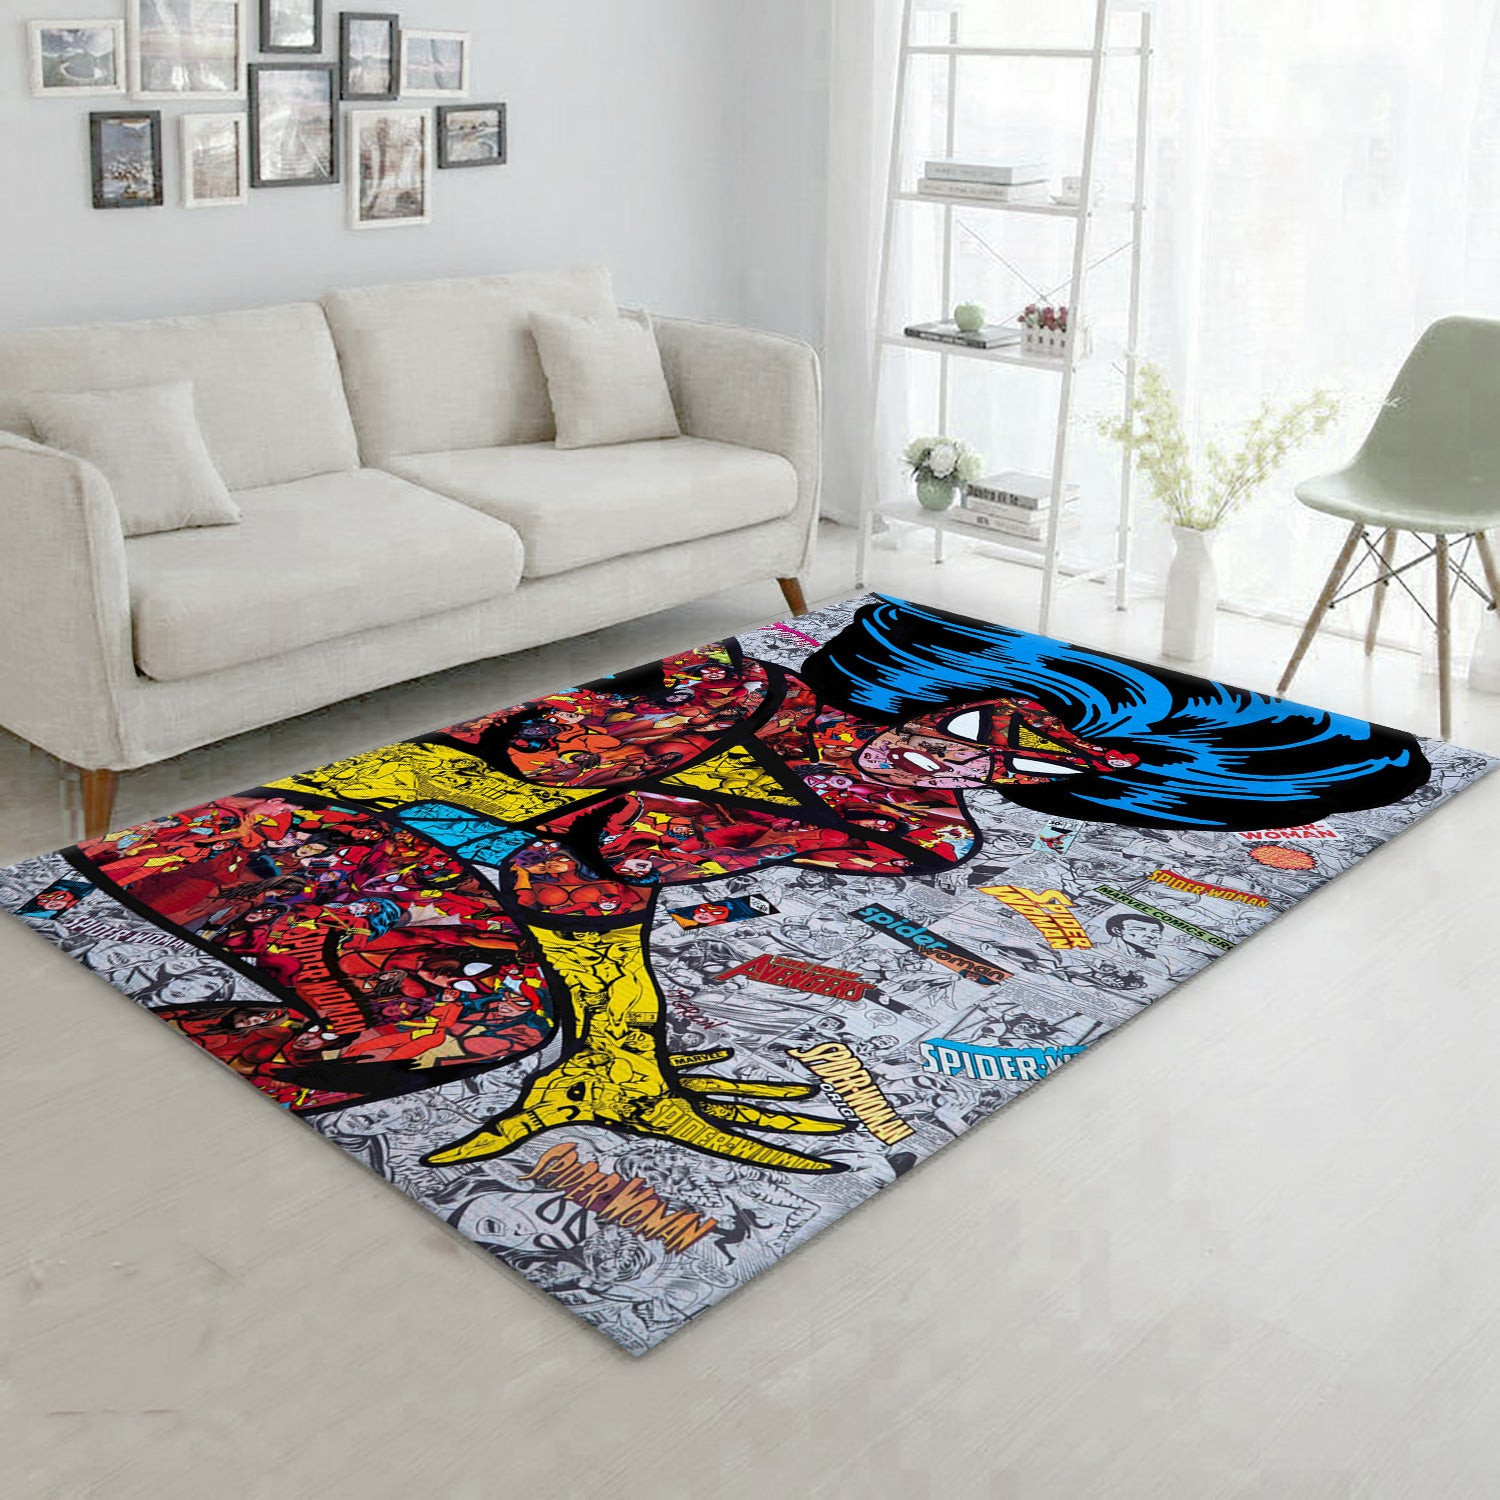 Spider Woman Movie Area Rug, Living Room And Bedroom Rug - Home US Decor - Indoor Outdoor Rugs